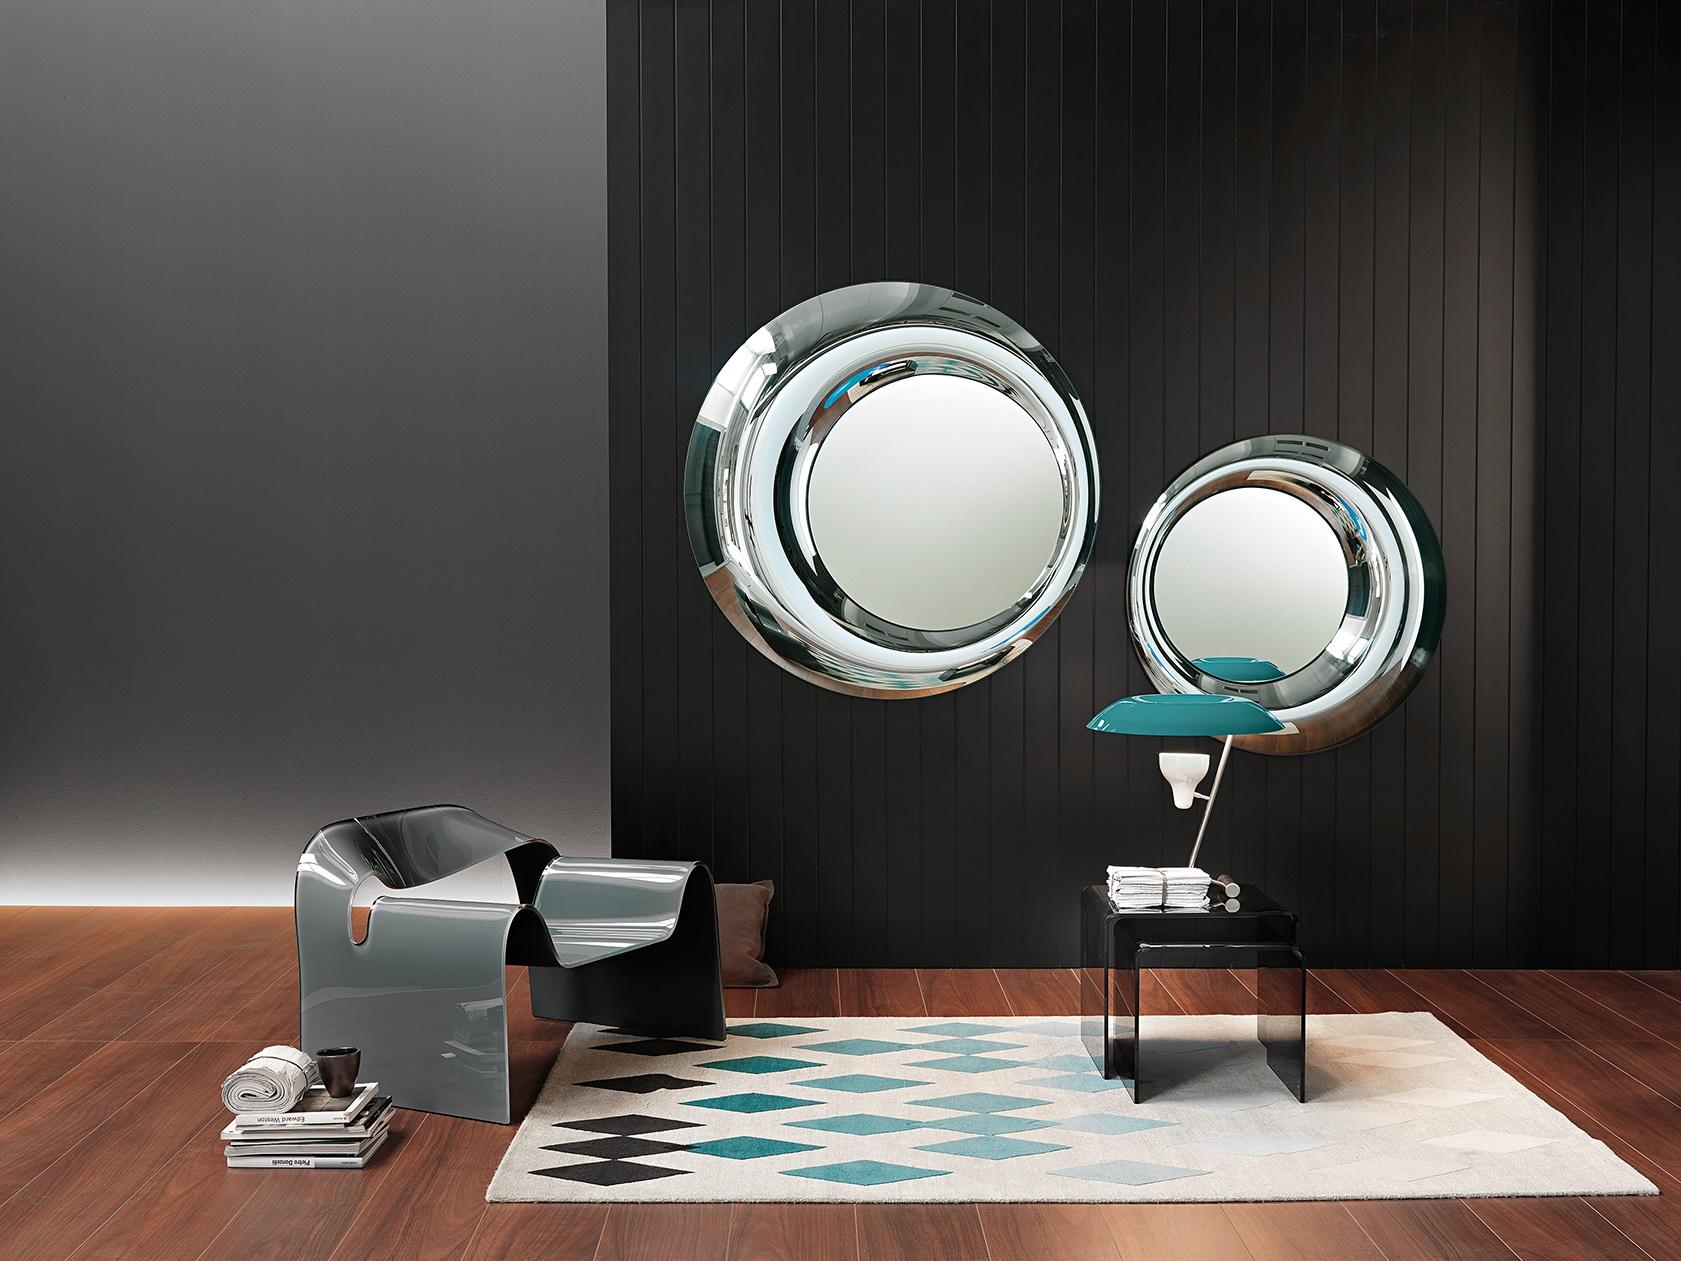 Wall mirror in 8 mm-thick fused and back-silvered glass; 5 mm-thick flat mirror. Rear mounting panel allowing hanging in various positions.
130 cm round.